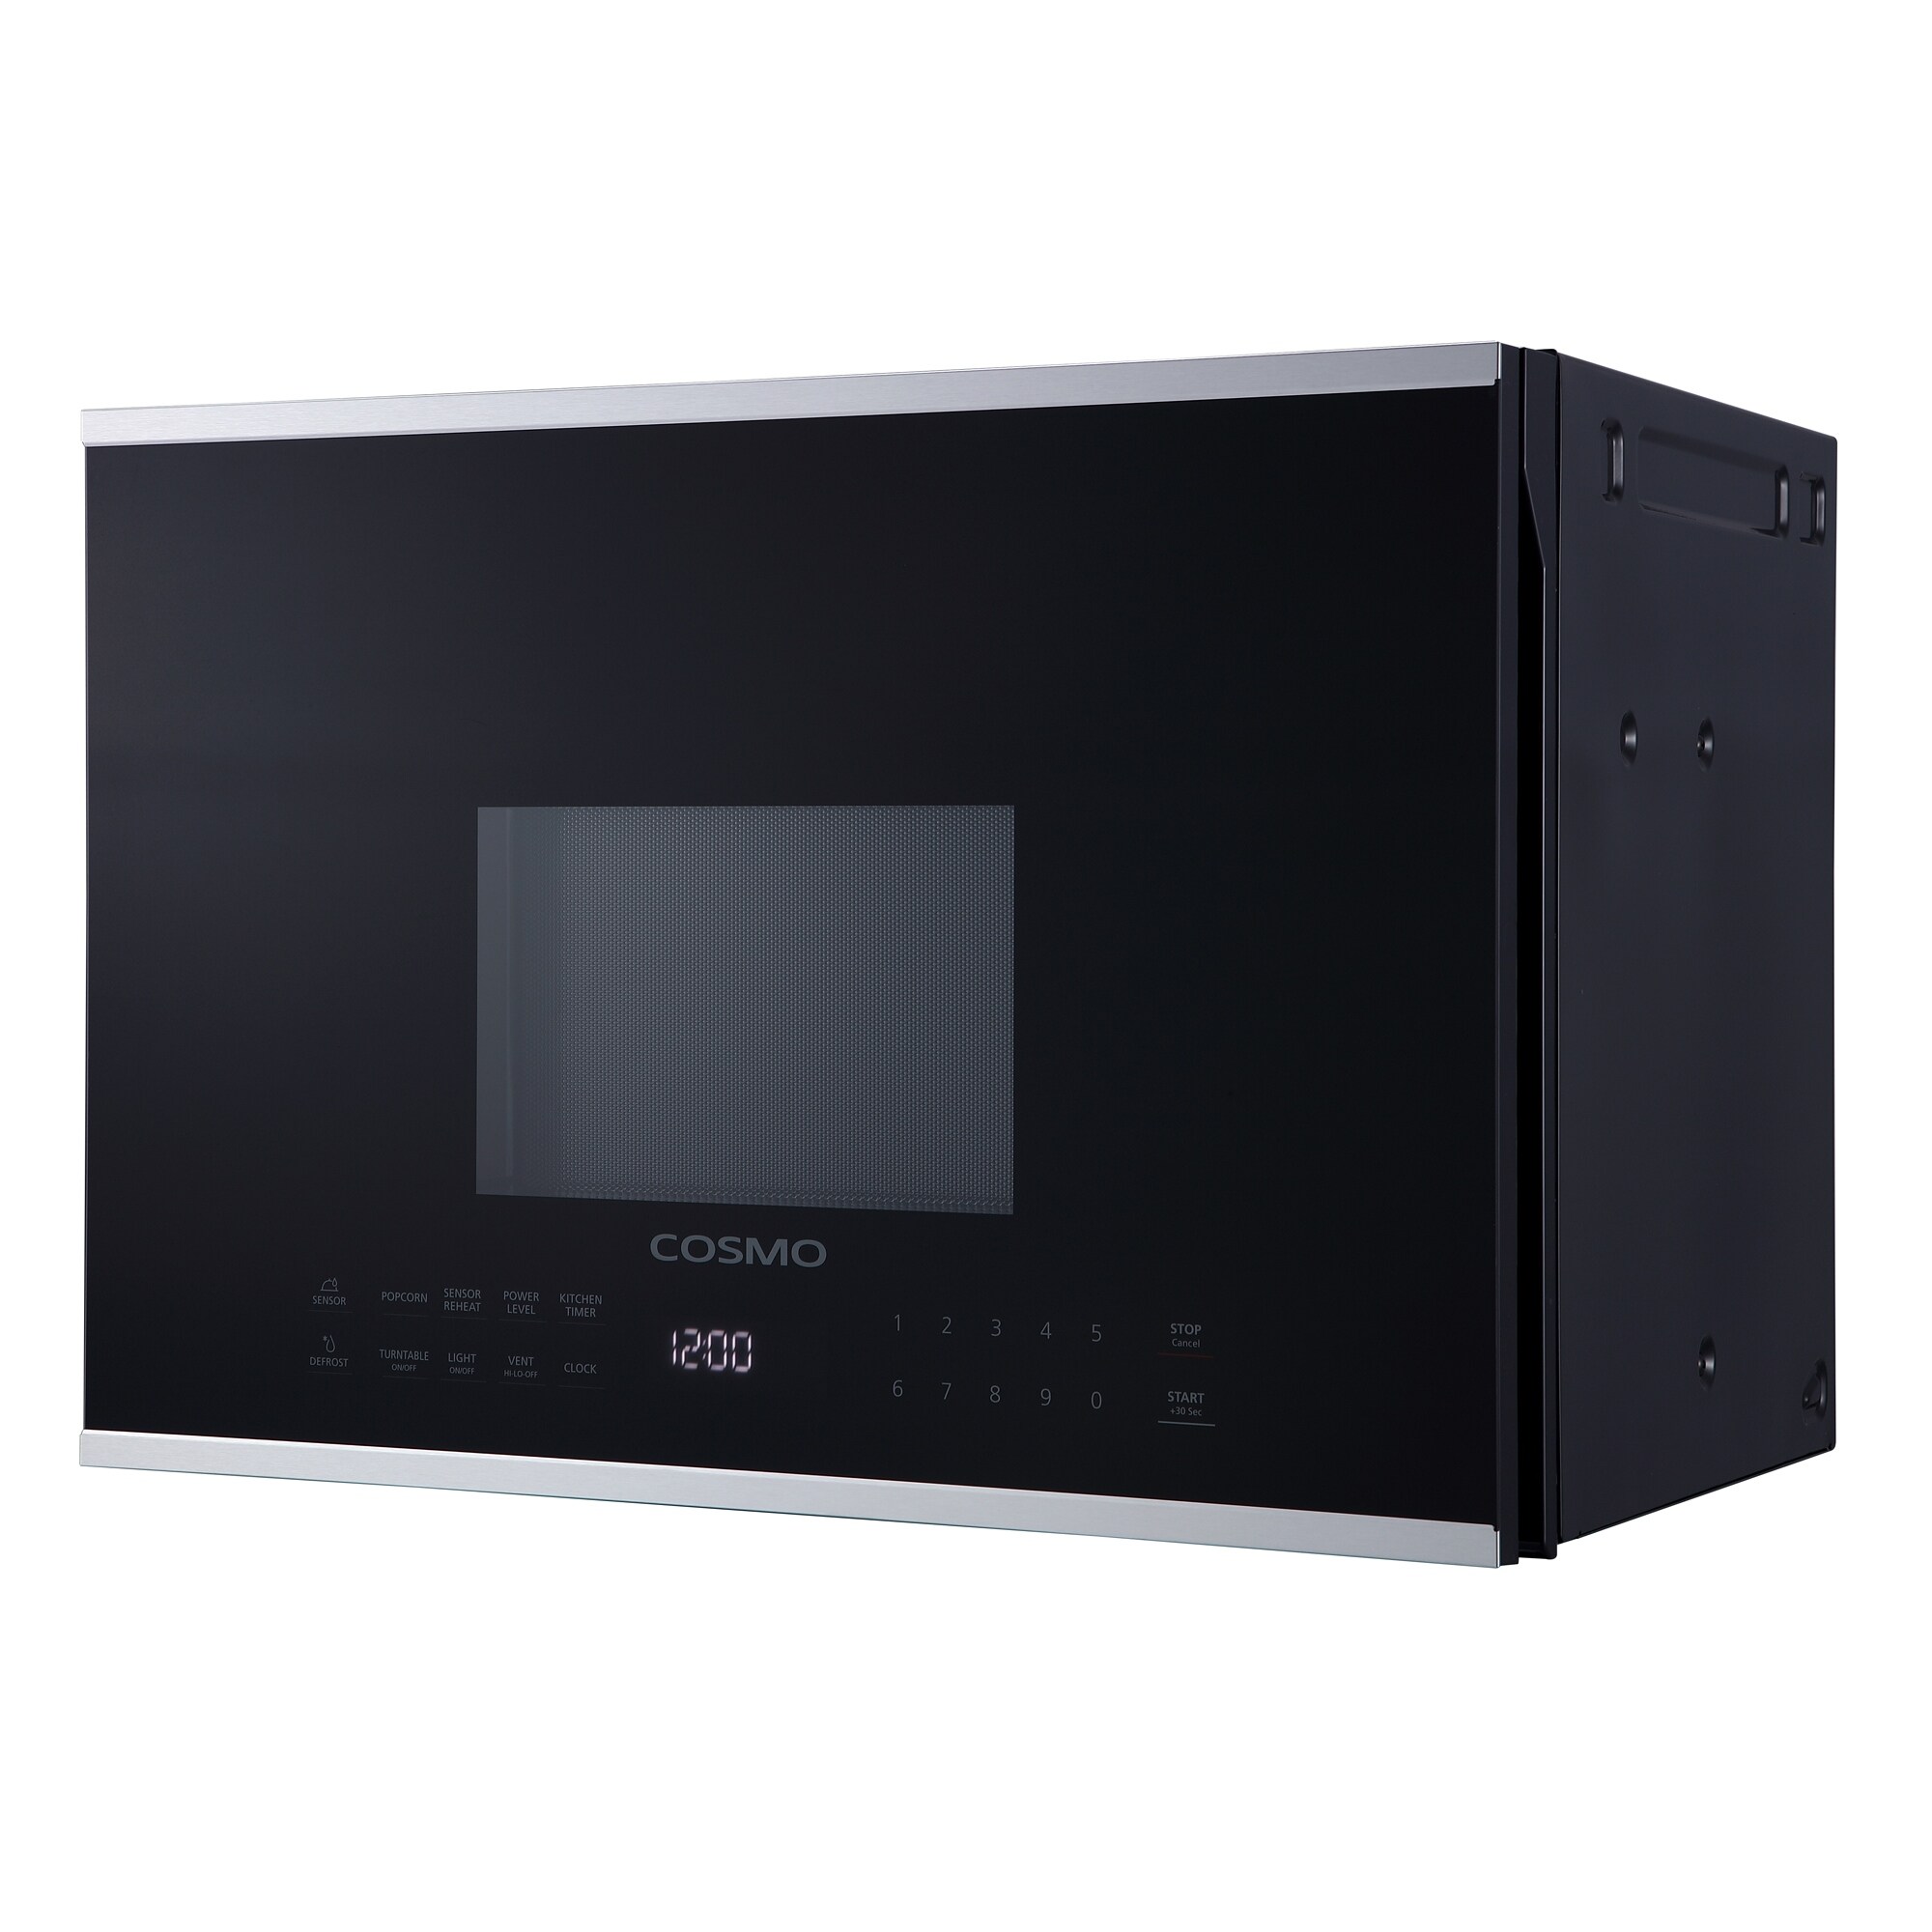 https://ak1.ostkcdn.com/images/products/is/images/direct/8d7c459b46523b14666031391ac1e0da1d54cd5c/24-in.-Over-The-Range-Microwave-Oven%2C-1000W%2C-1.34-cu.-ft.-with-Vent-Fan-in-Black-Stainless-Steel.jpg